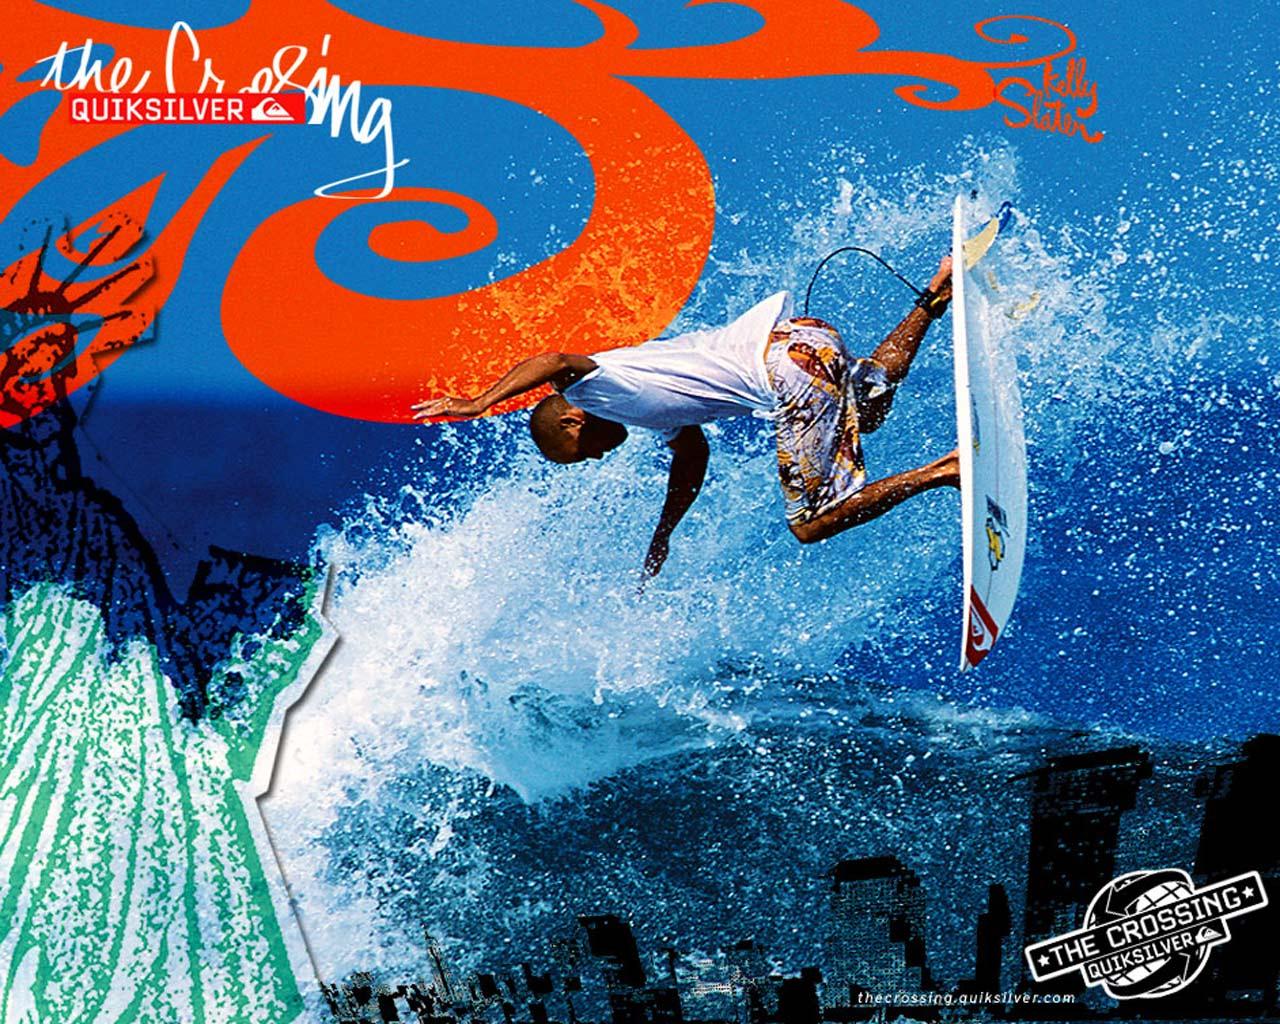 s later wallpaper,extreme sport,cool,street dance,wakeboarding,album cover